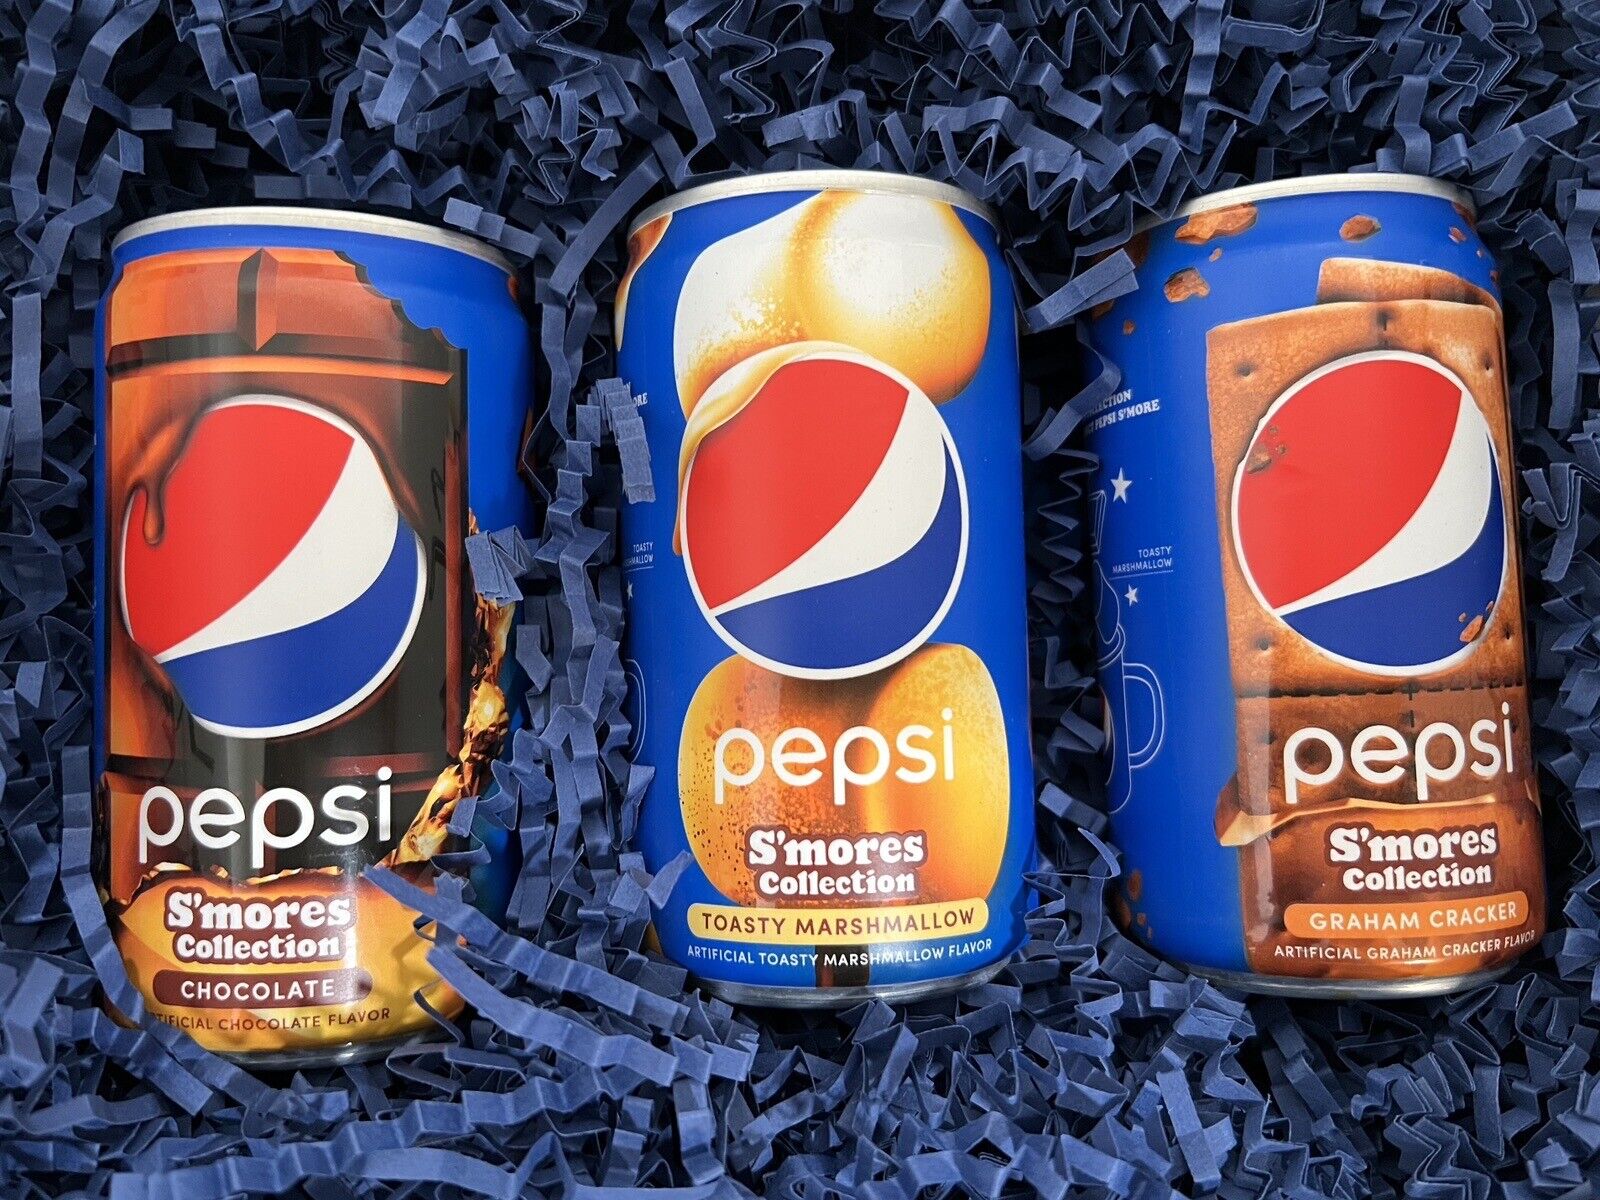 Pepsi S'mores LIMITED EDITION 3 Cans Set Smores Collection Sweepstakes